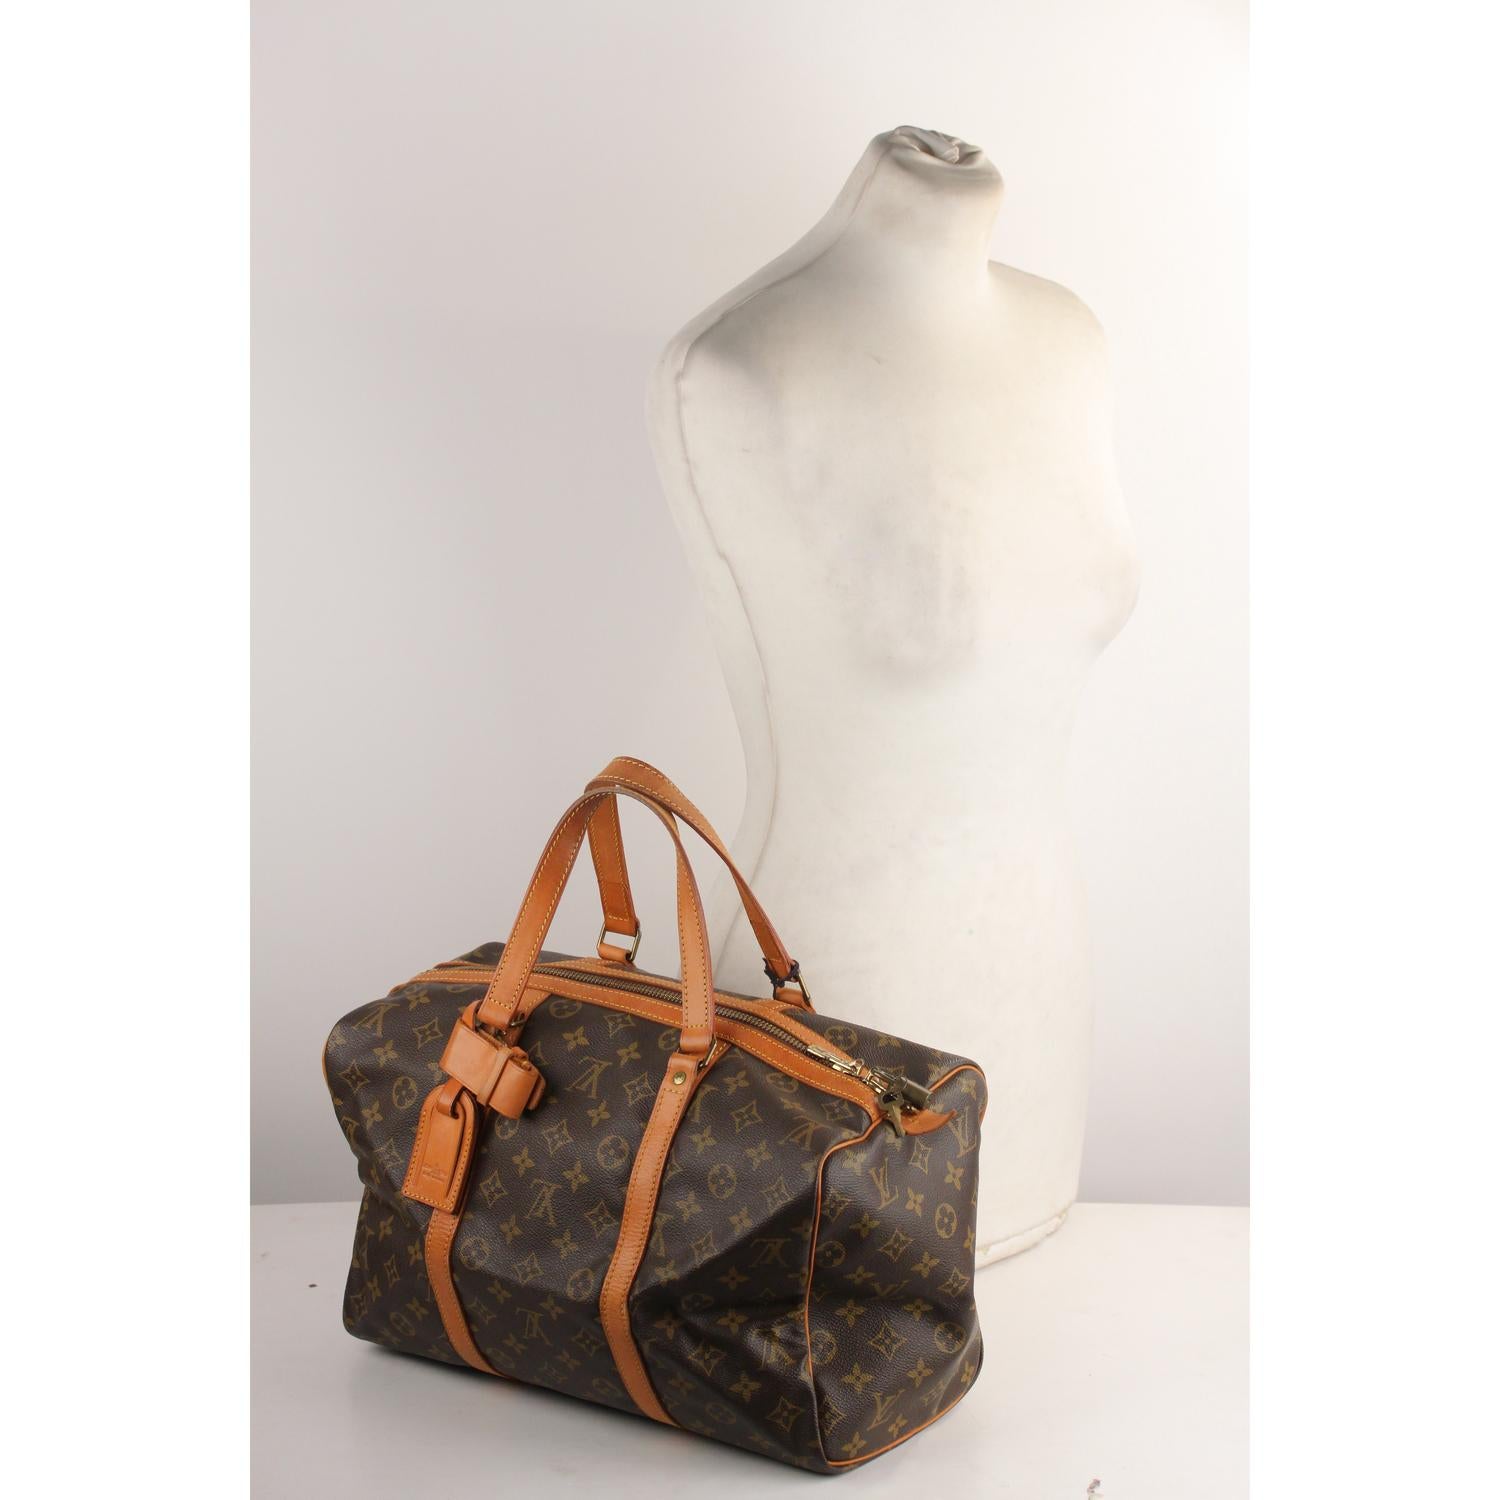 Louis Vuitton classic Monogram Canvas vintage 'Sac Souple' 35. Upper zipper closure with Louis Vuitton Padlock and keys. Double leather handles. Brown fabric lining. 'Louis Vuitton Paris - made in France' engraved on leather piece on the side.